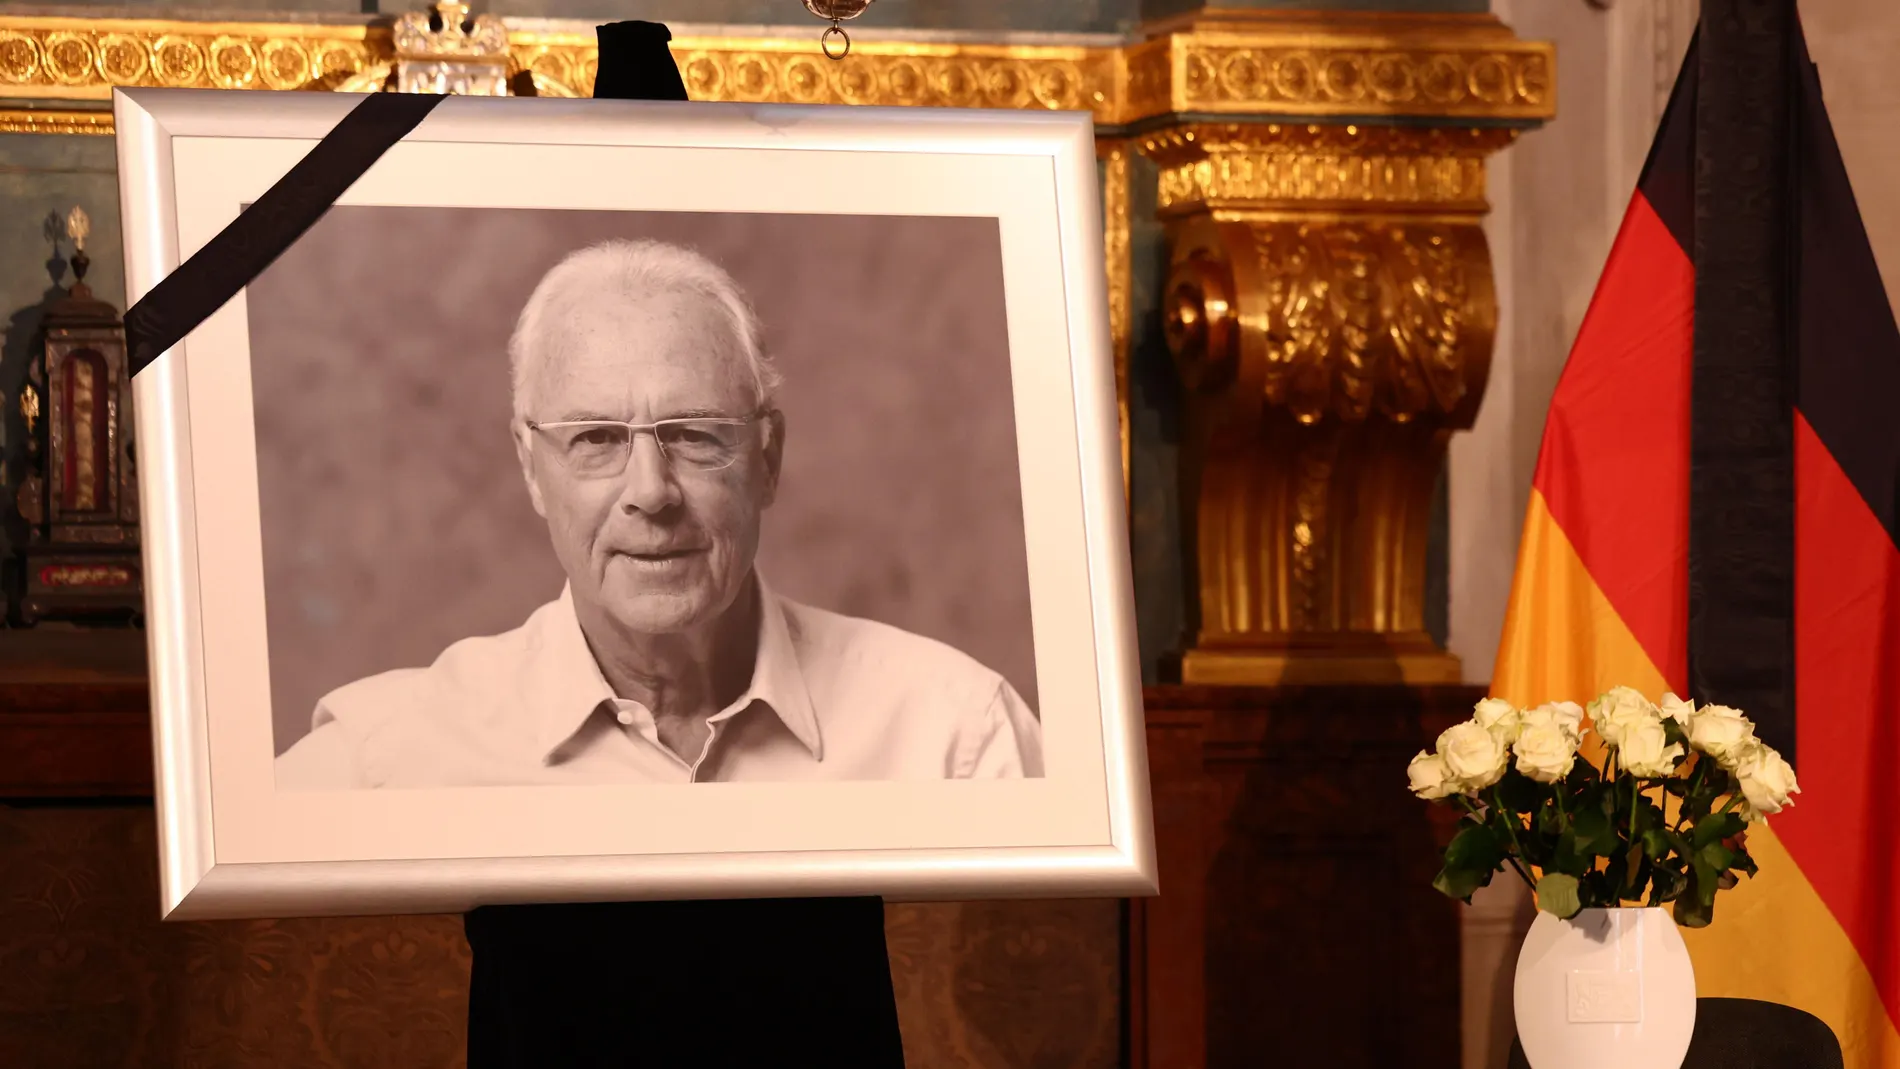 Munich (Germany), 11/01/2024.- A portrait of Franz Beckenbauer at the Hofkapelle in Munich Germany, 11 January 2024. The German and Bayern Munich soccer legend passed away on 07 January 2024 at the age of 78. (Alemania) EFE/EPA/ANNA SZILAGYI